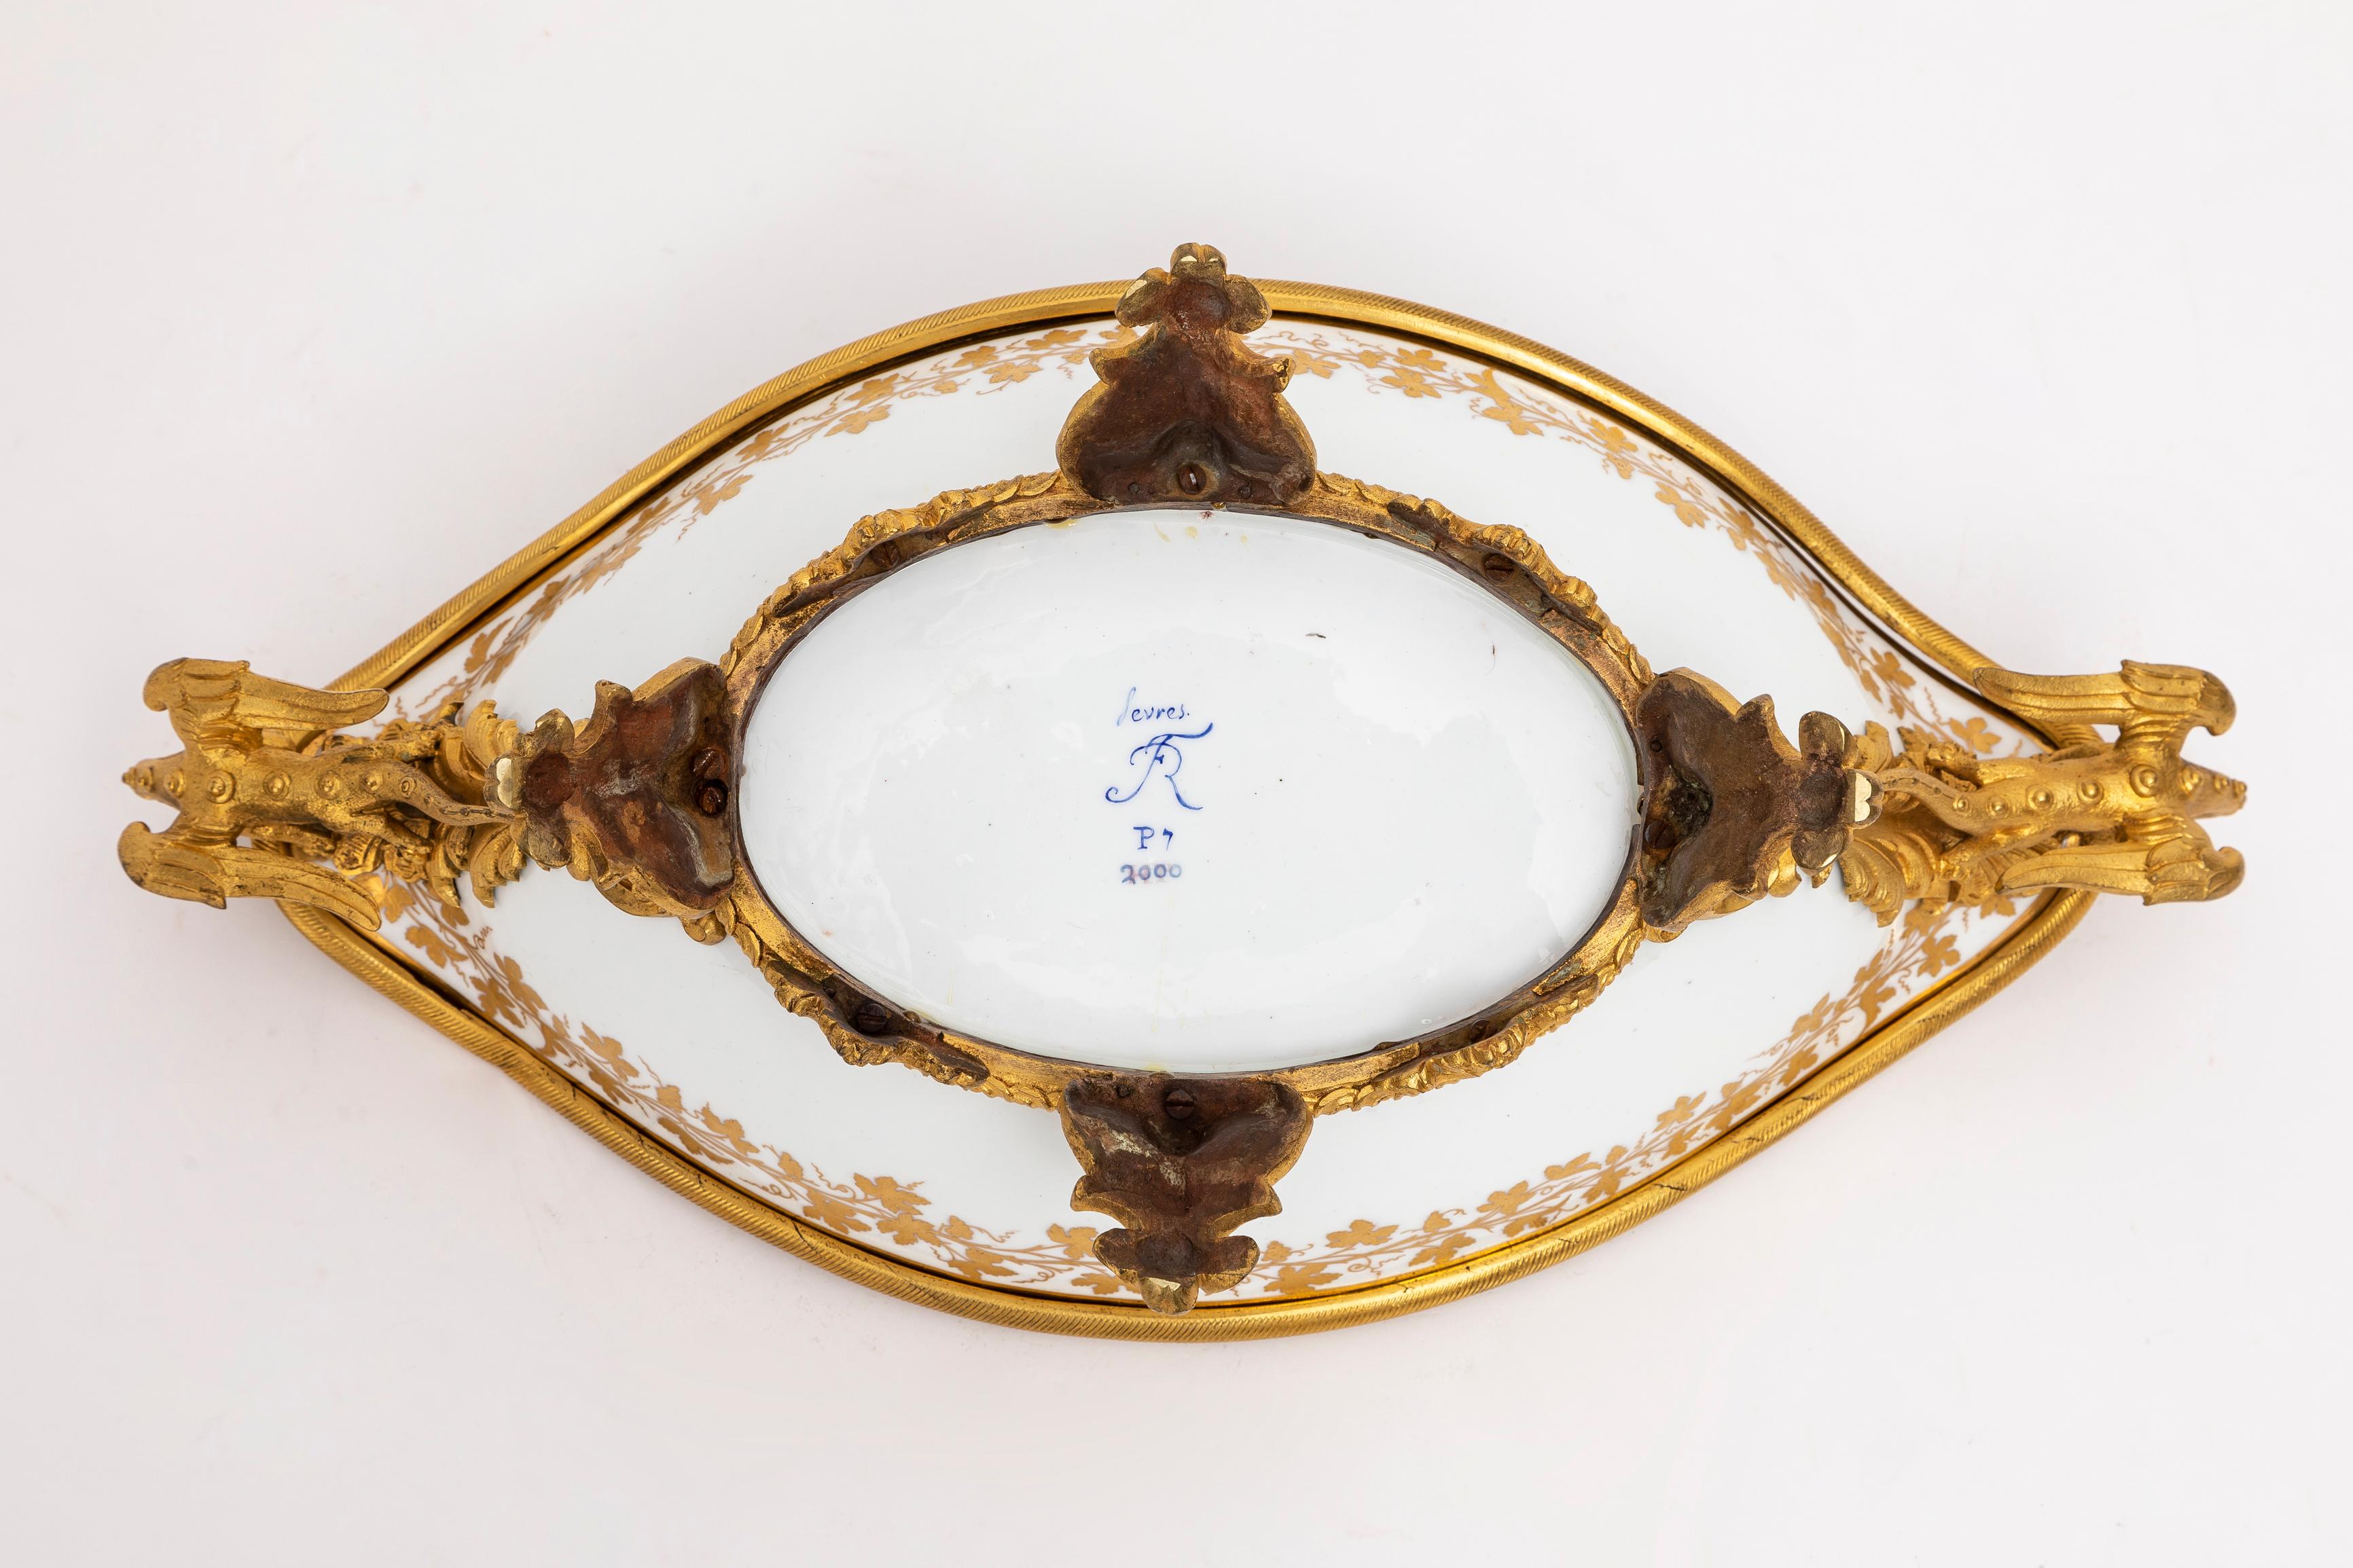 An 18th C. French Ormolu Mounted Sevres Porcelain Centerpiece w/ Dragon Handles For Sale 7